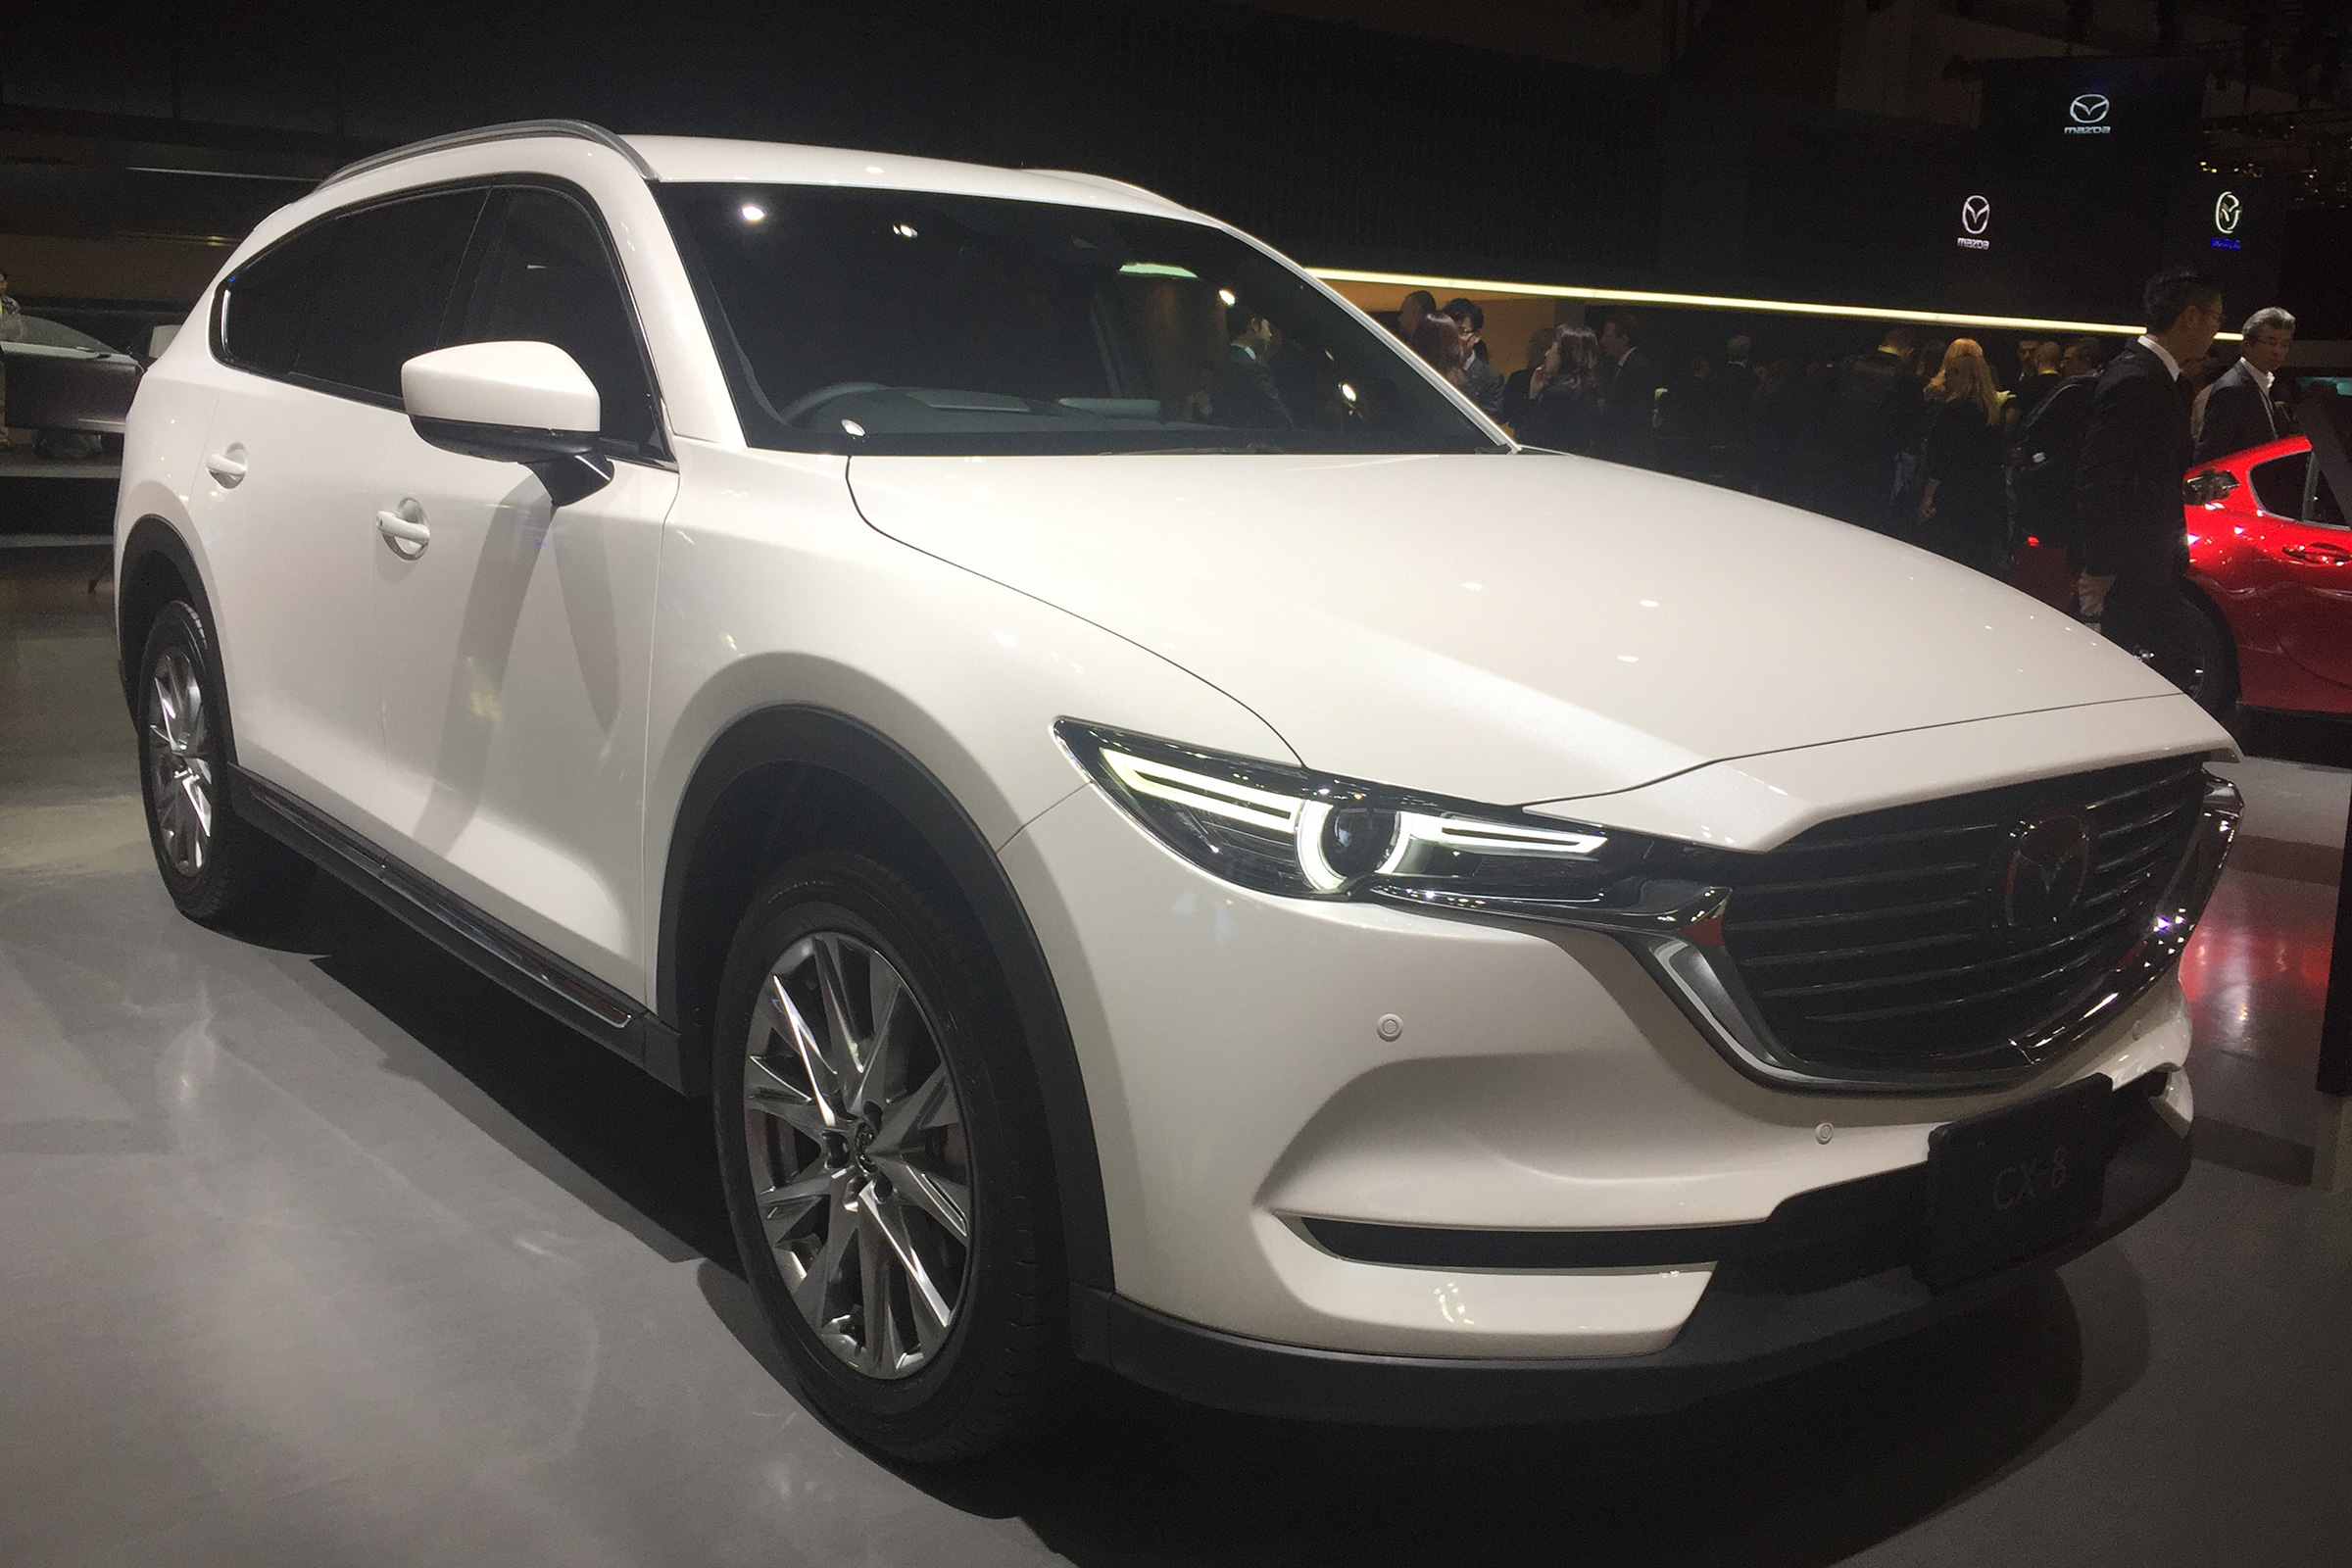 Japan-only Mazda CX-8 SUV revealed in Tokyo | Auto Express